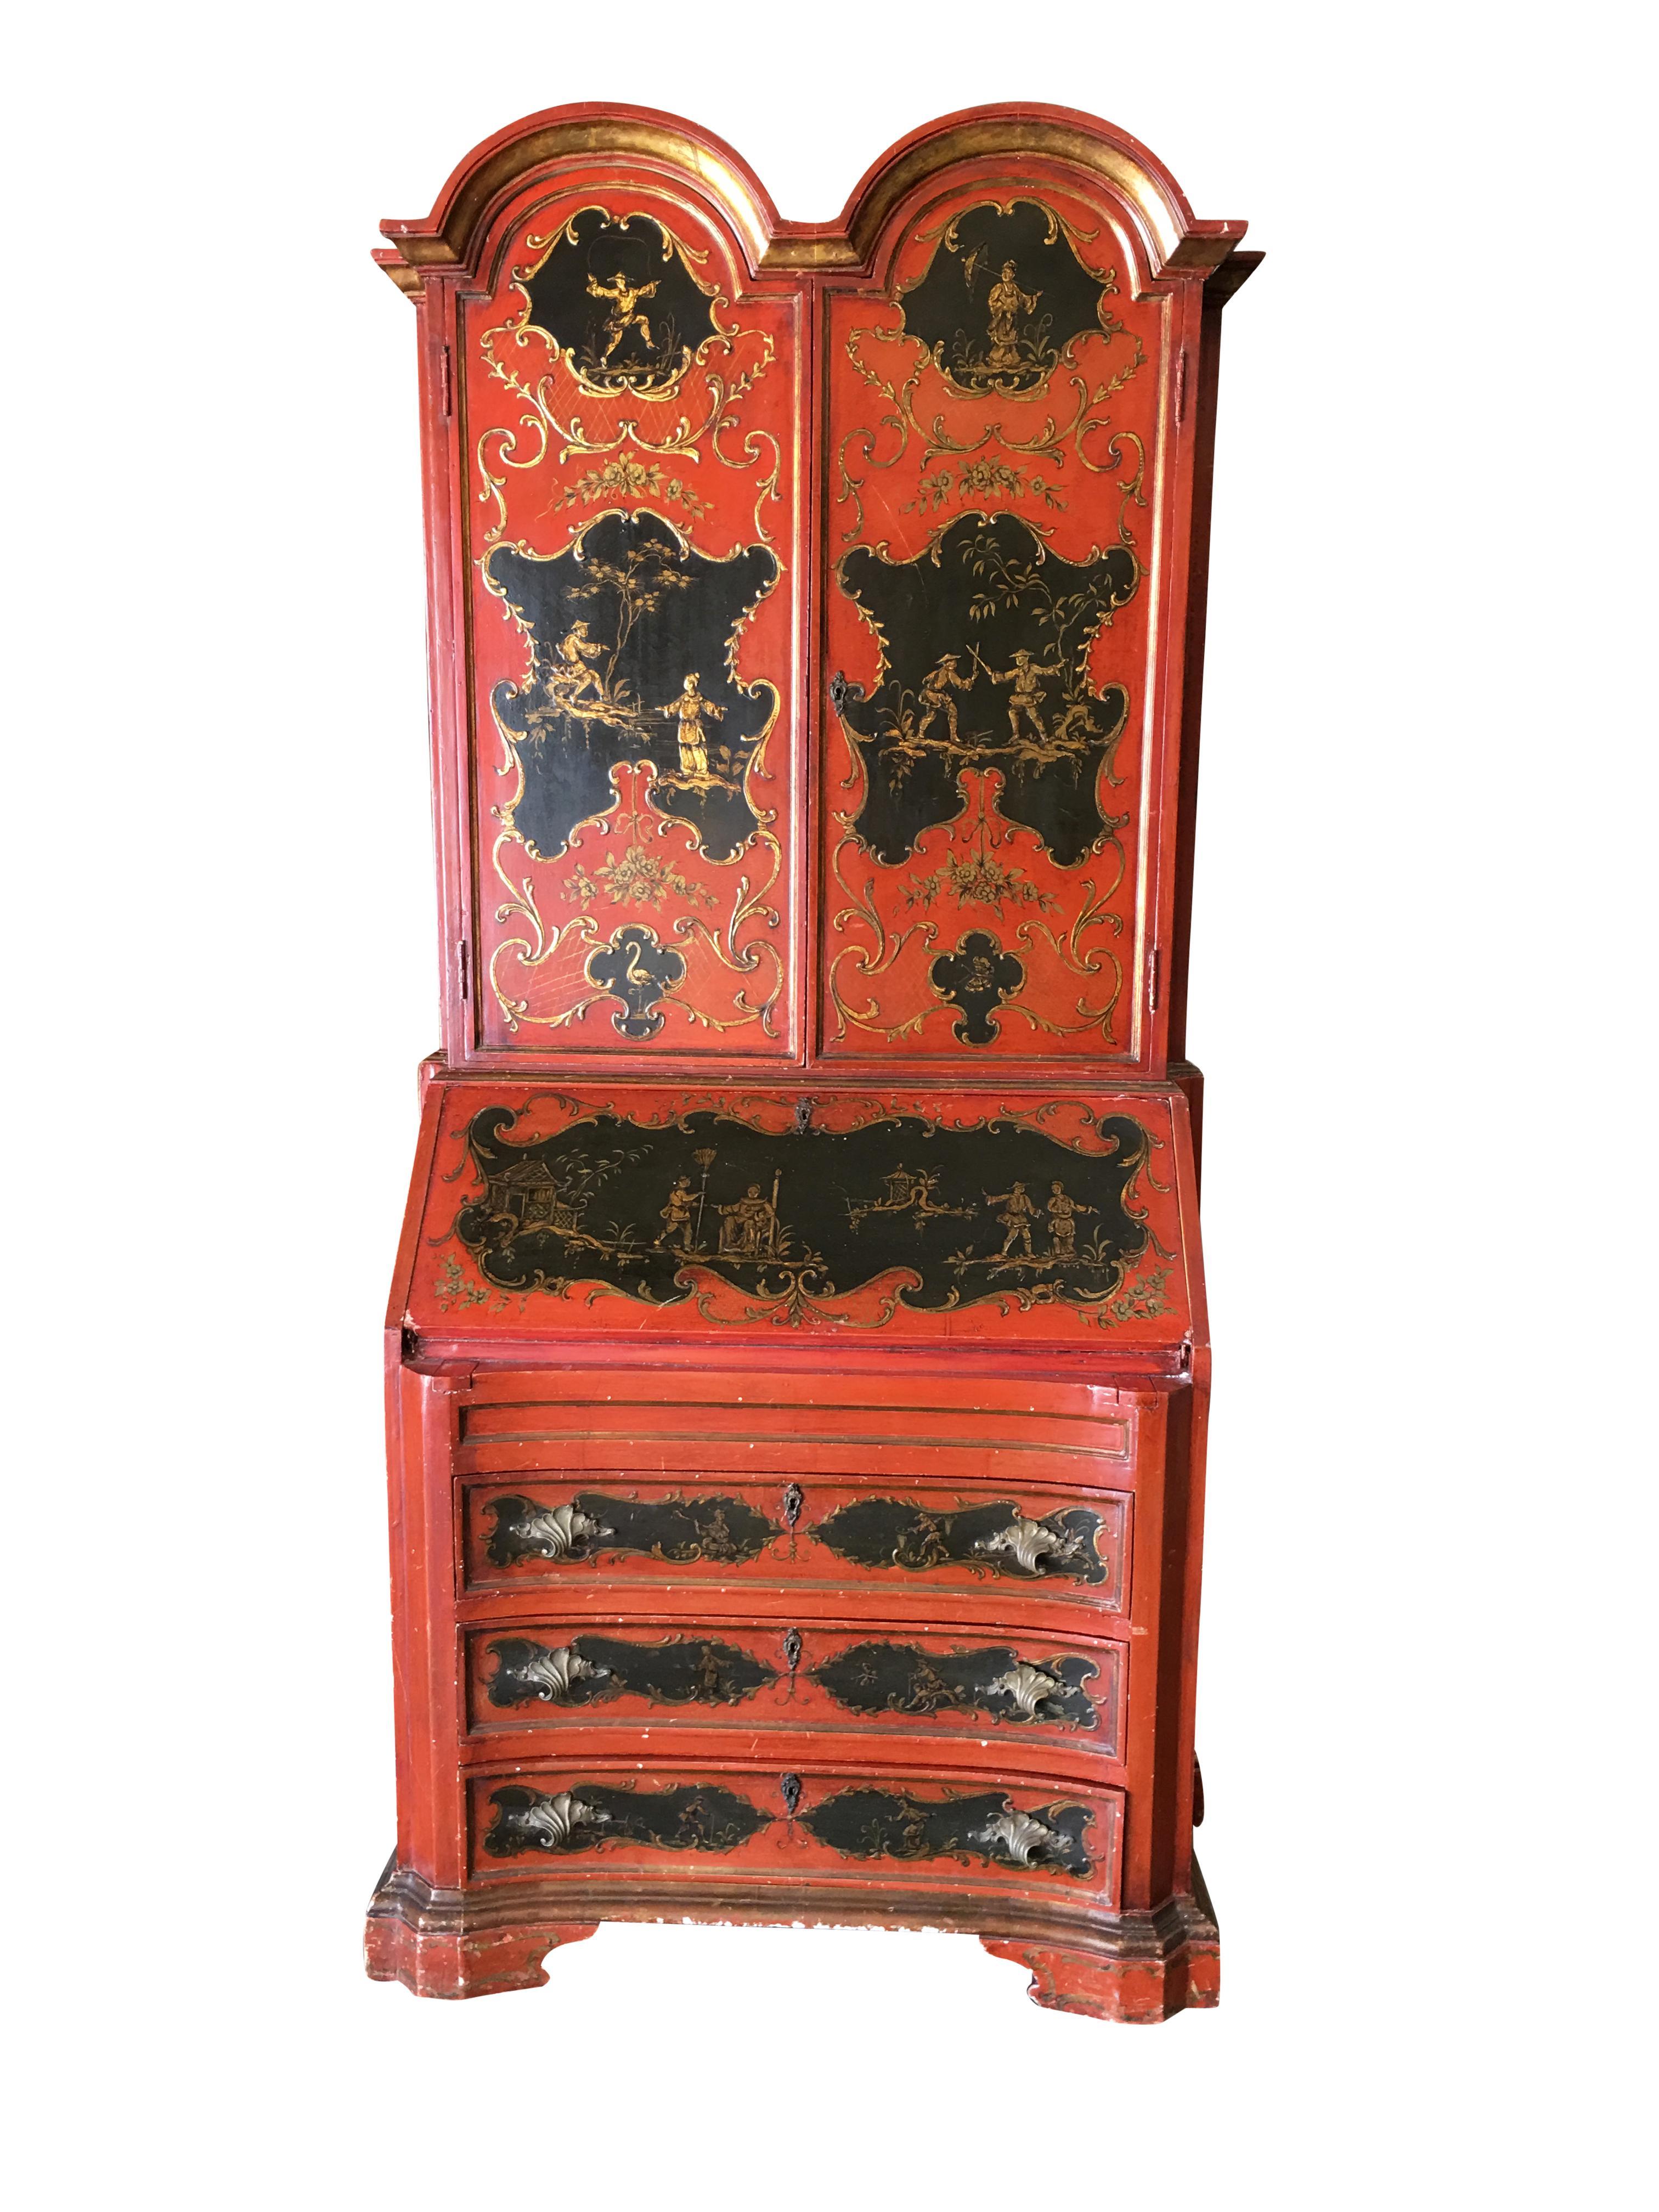 Hollywood Regency secretary desk secretaire bookcase with hand-painted Chinese motif featuring a breakfront cabinet with a small secretary desk in the middle and three drawers along the bottom. Circa 1950. This desk is in excellent